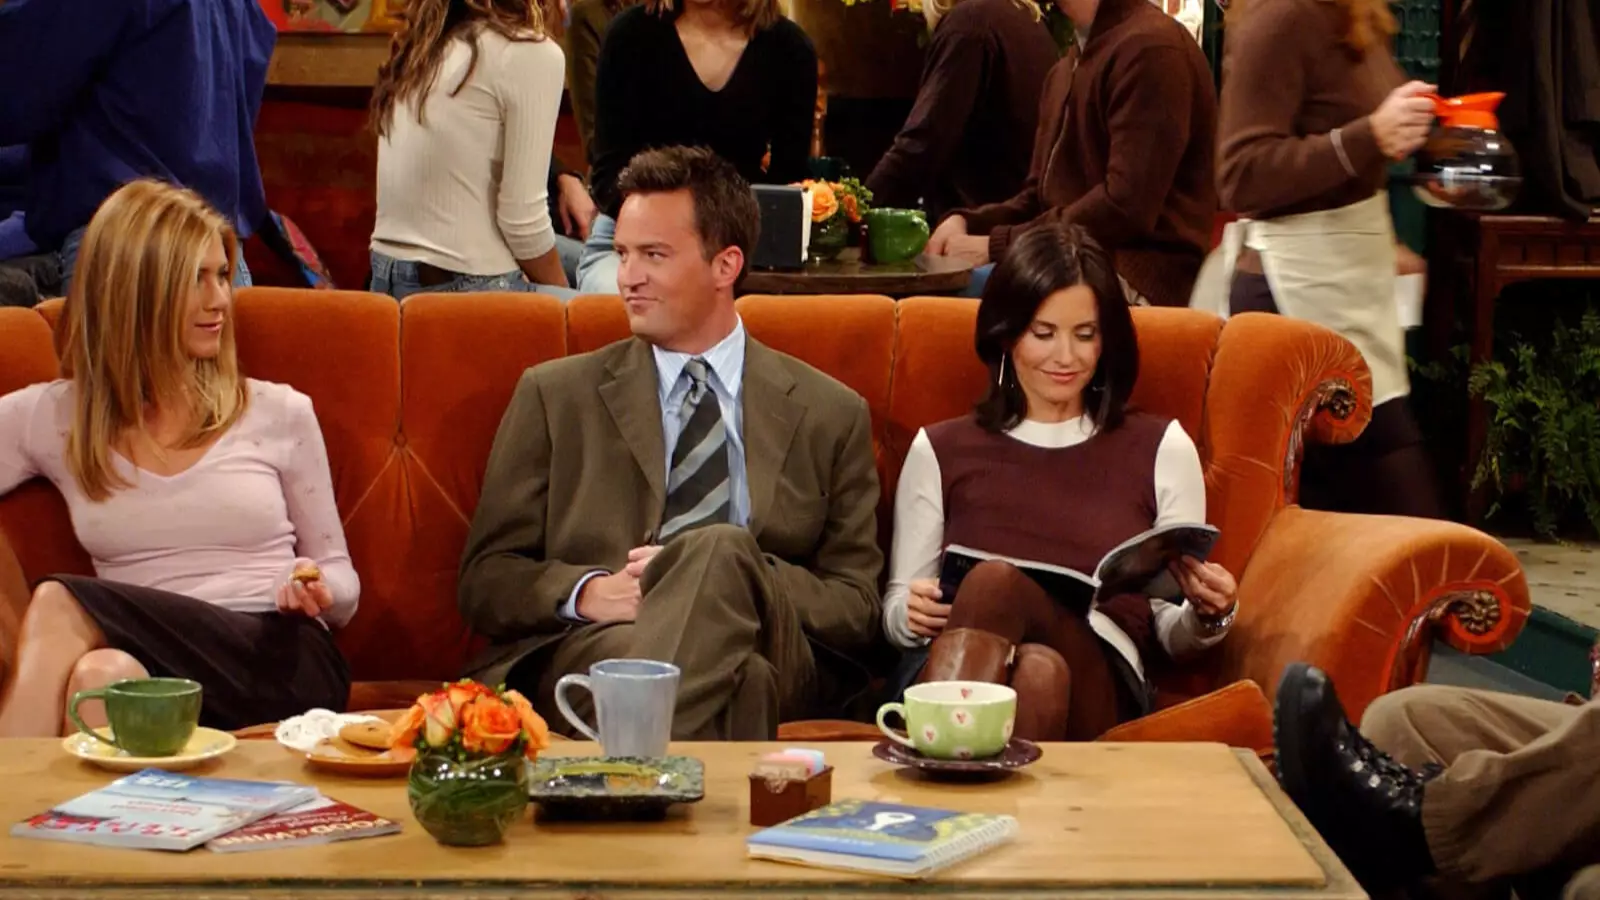 A 'Friends' Homeware Collection Just Dropped Featuring A Replica Of The Central Perk Sofa